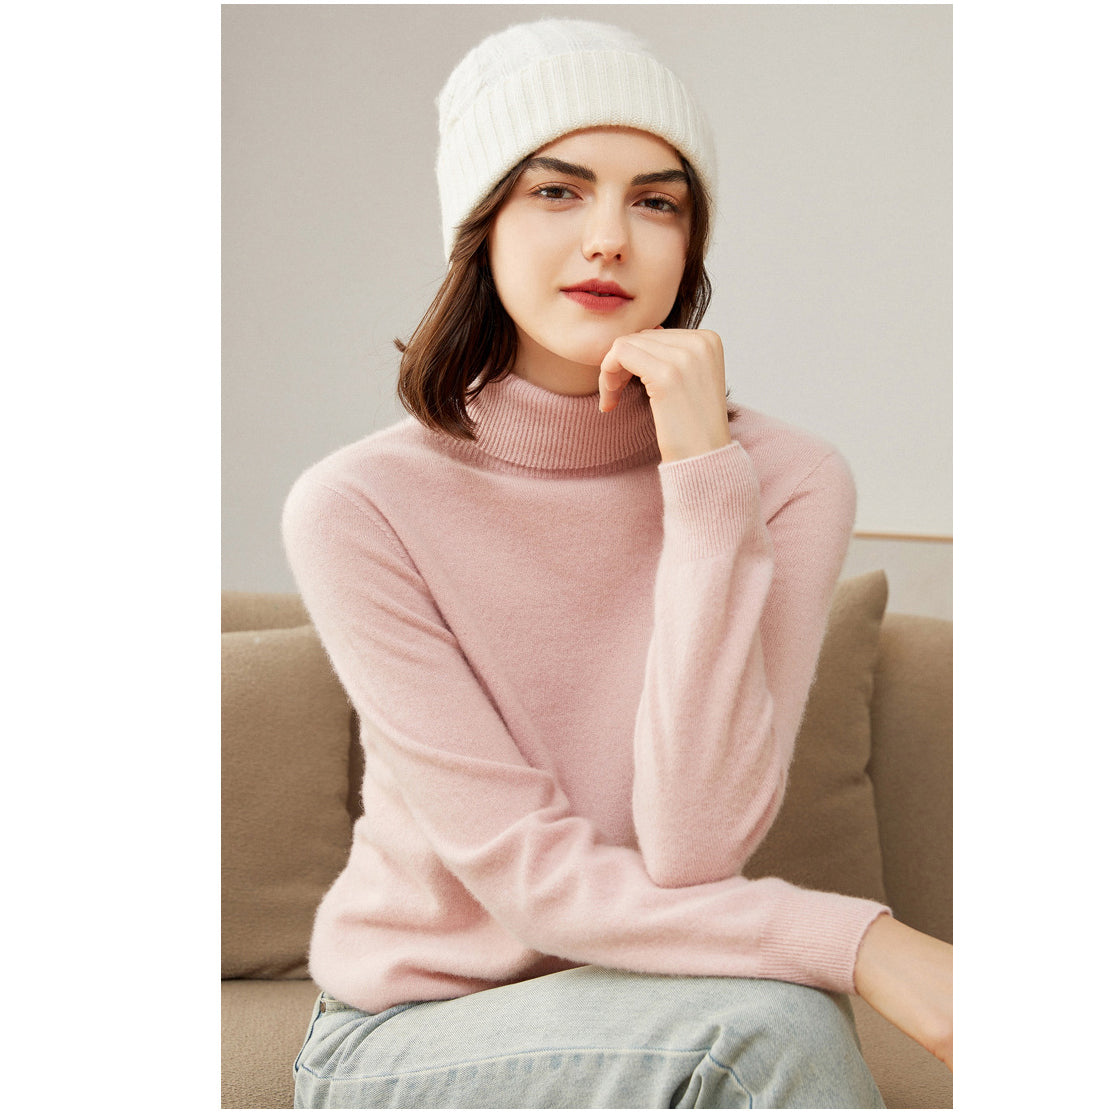 Women's 100% Pure Cashmere Sweater Long Sleeve Turtleneck Cashmere Tops